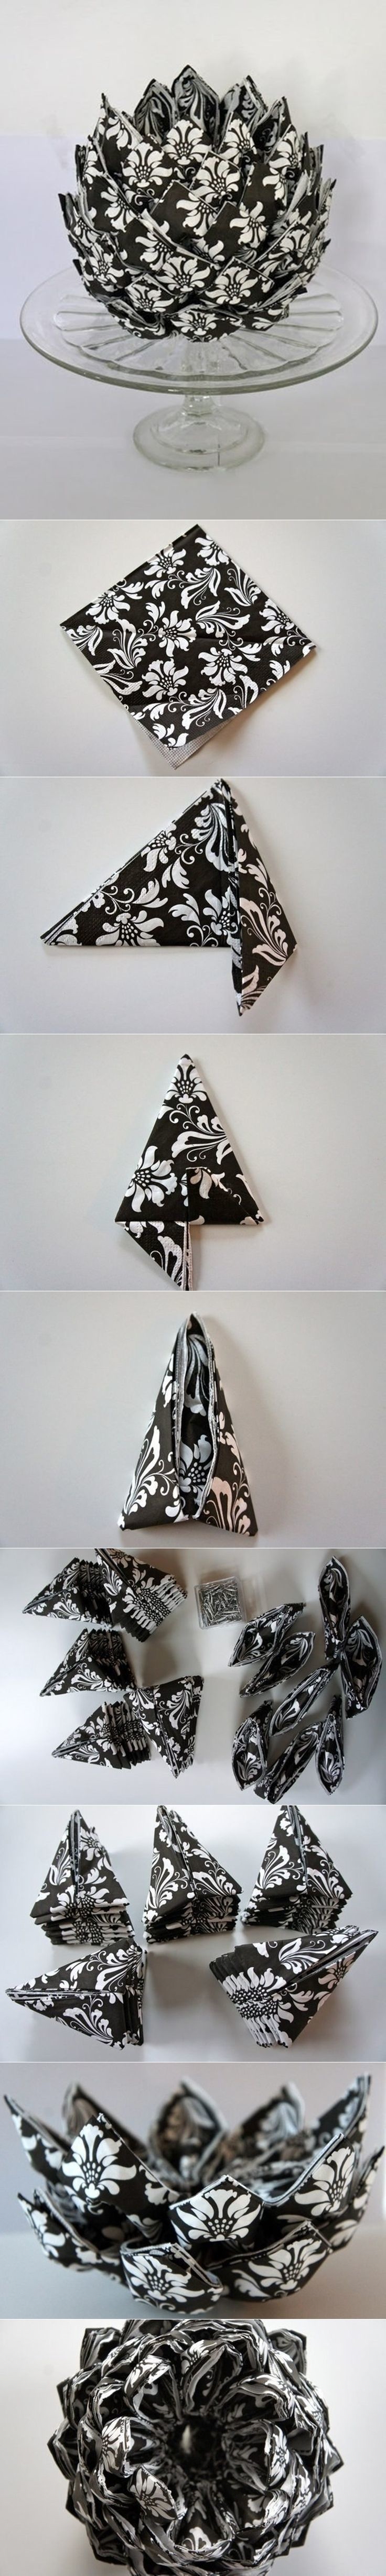 AD-Napkin-Folding-Techniques-That-Will-Transform-Your-Dinner-Table-21